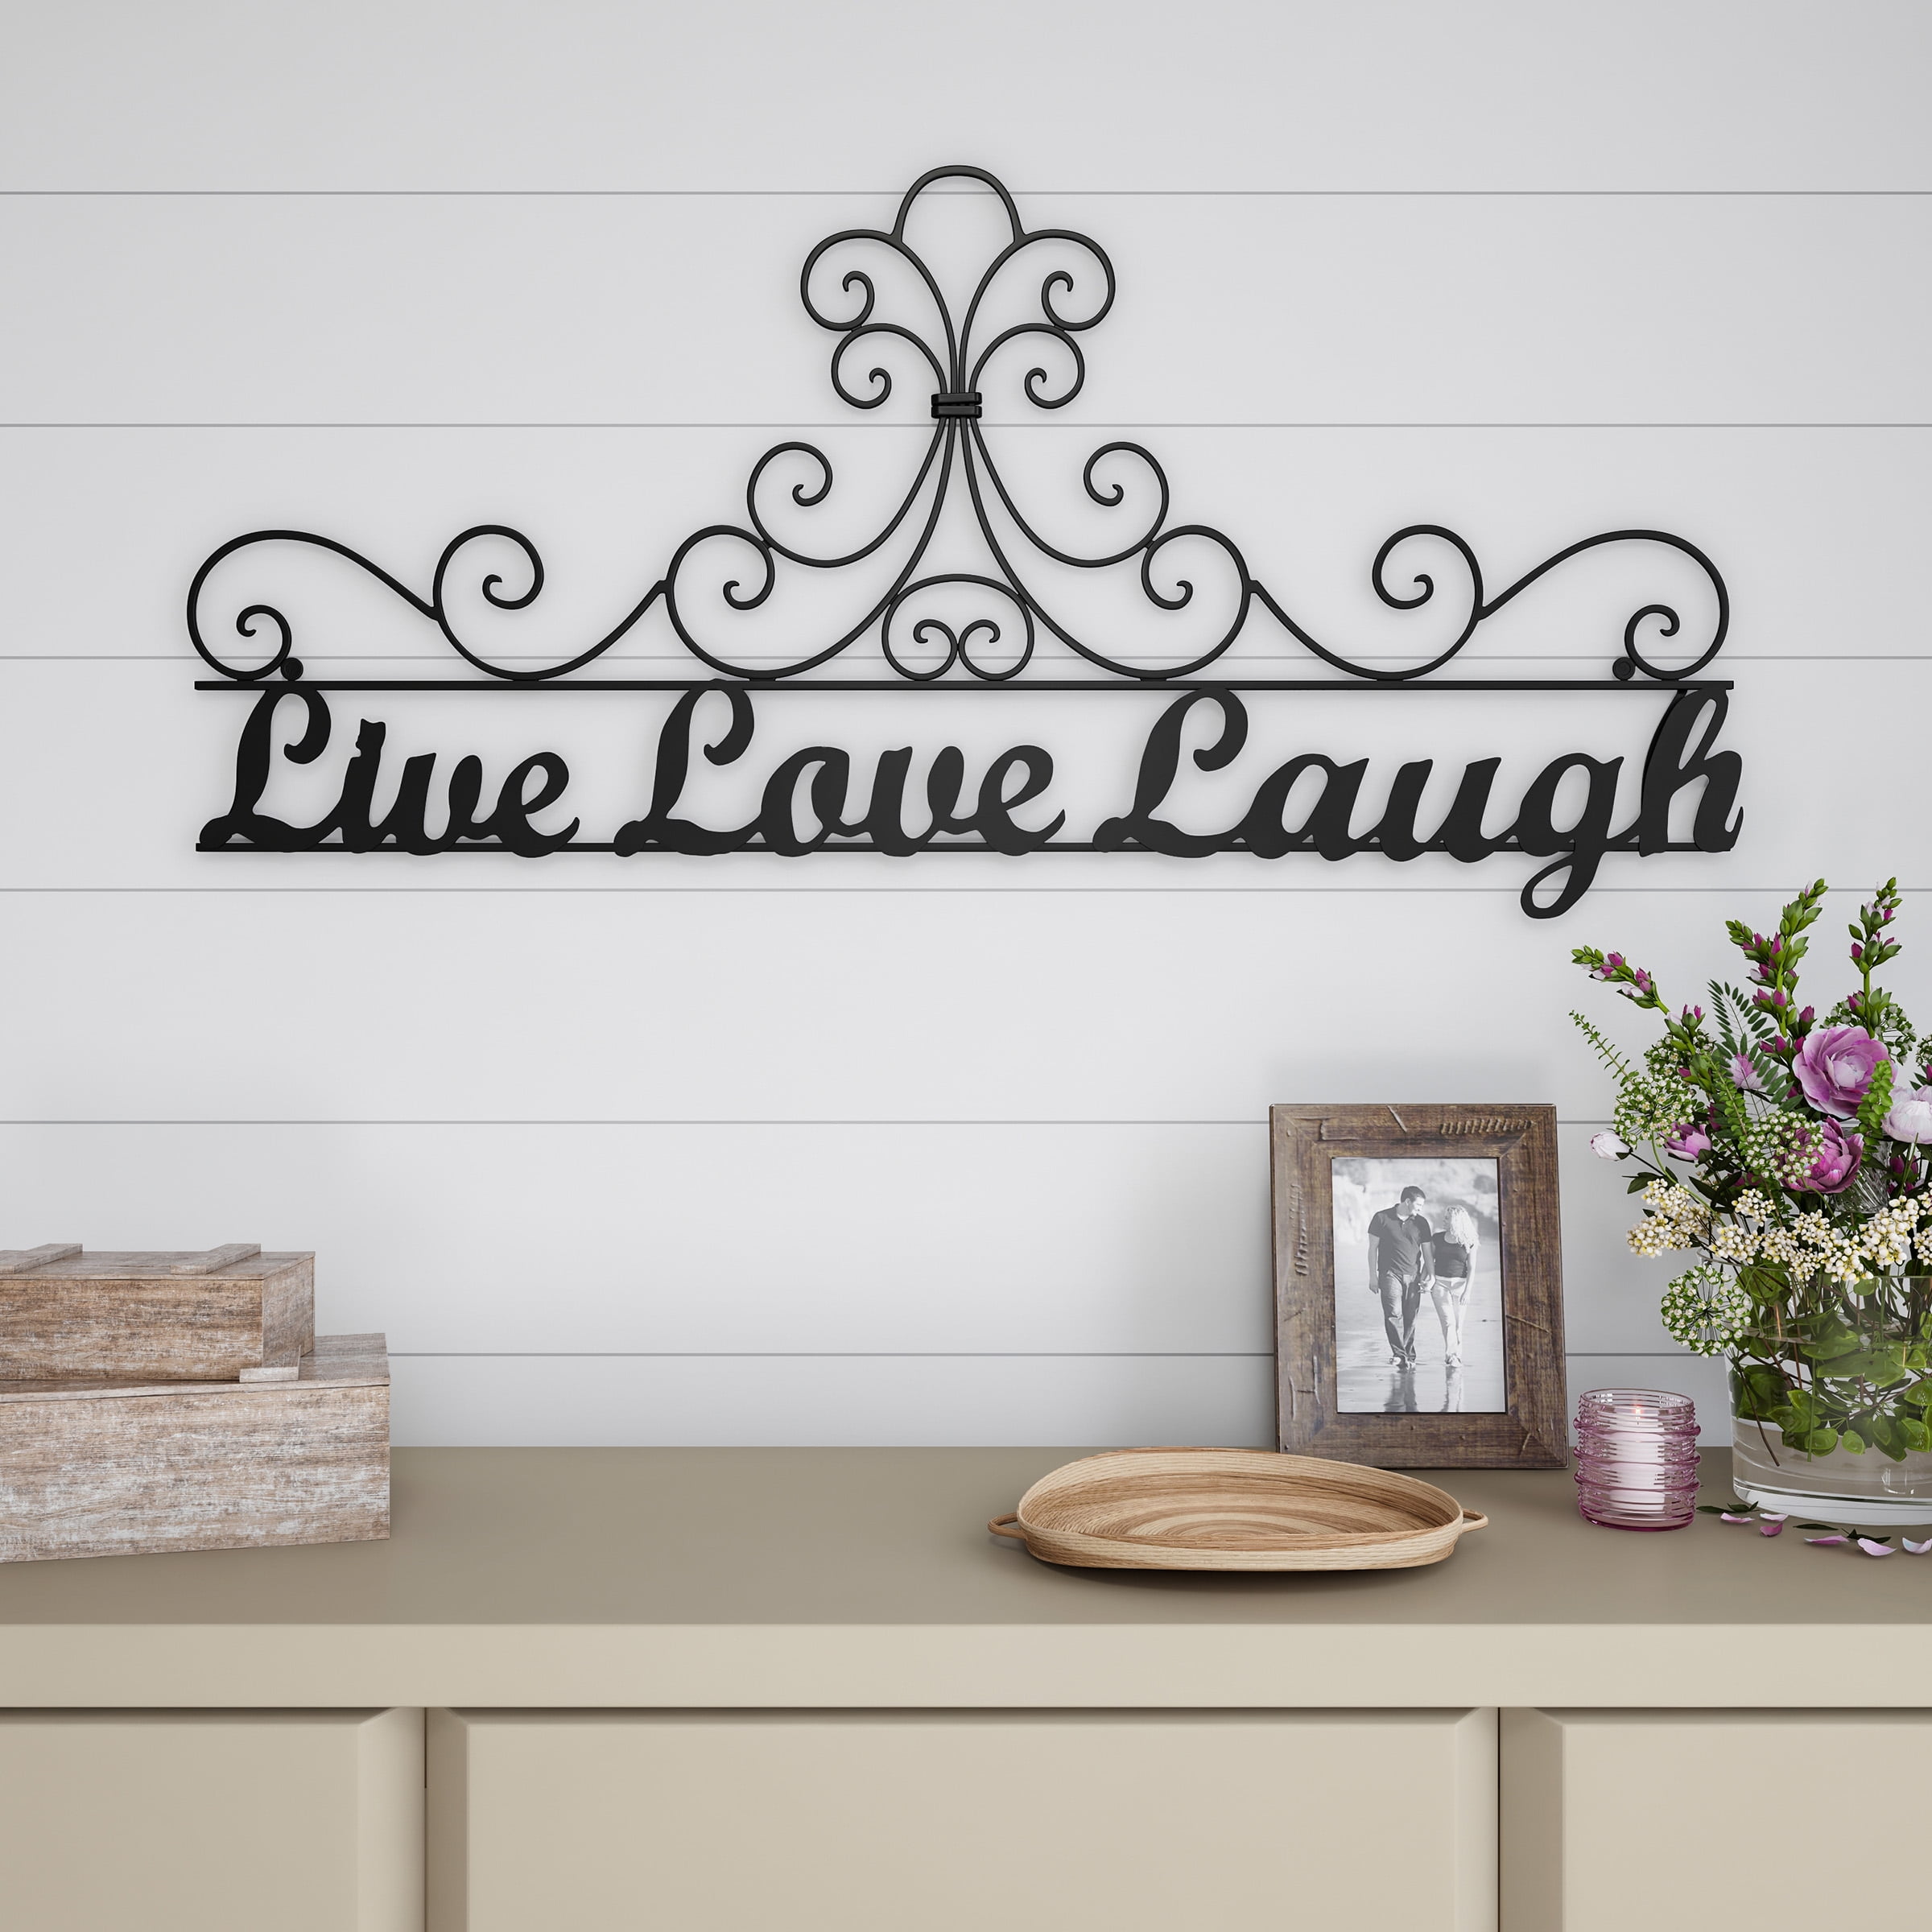 Family Word Art Sign Home Kitchen Decor Wall Hanging Cursive